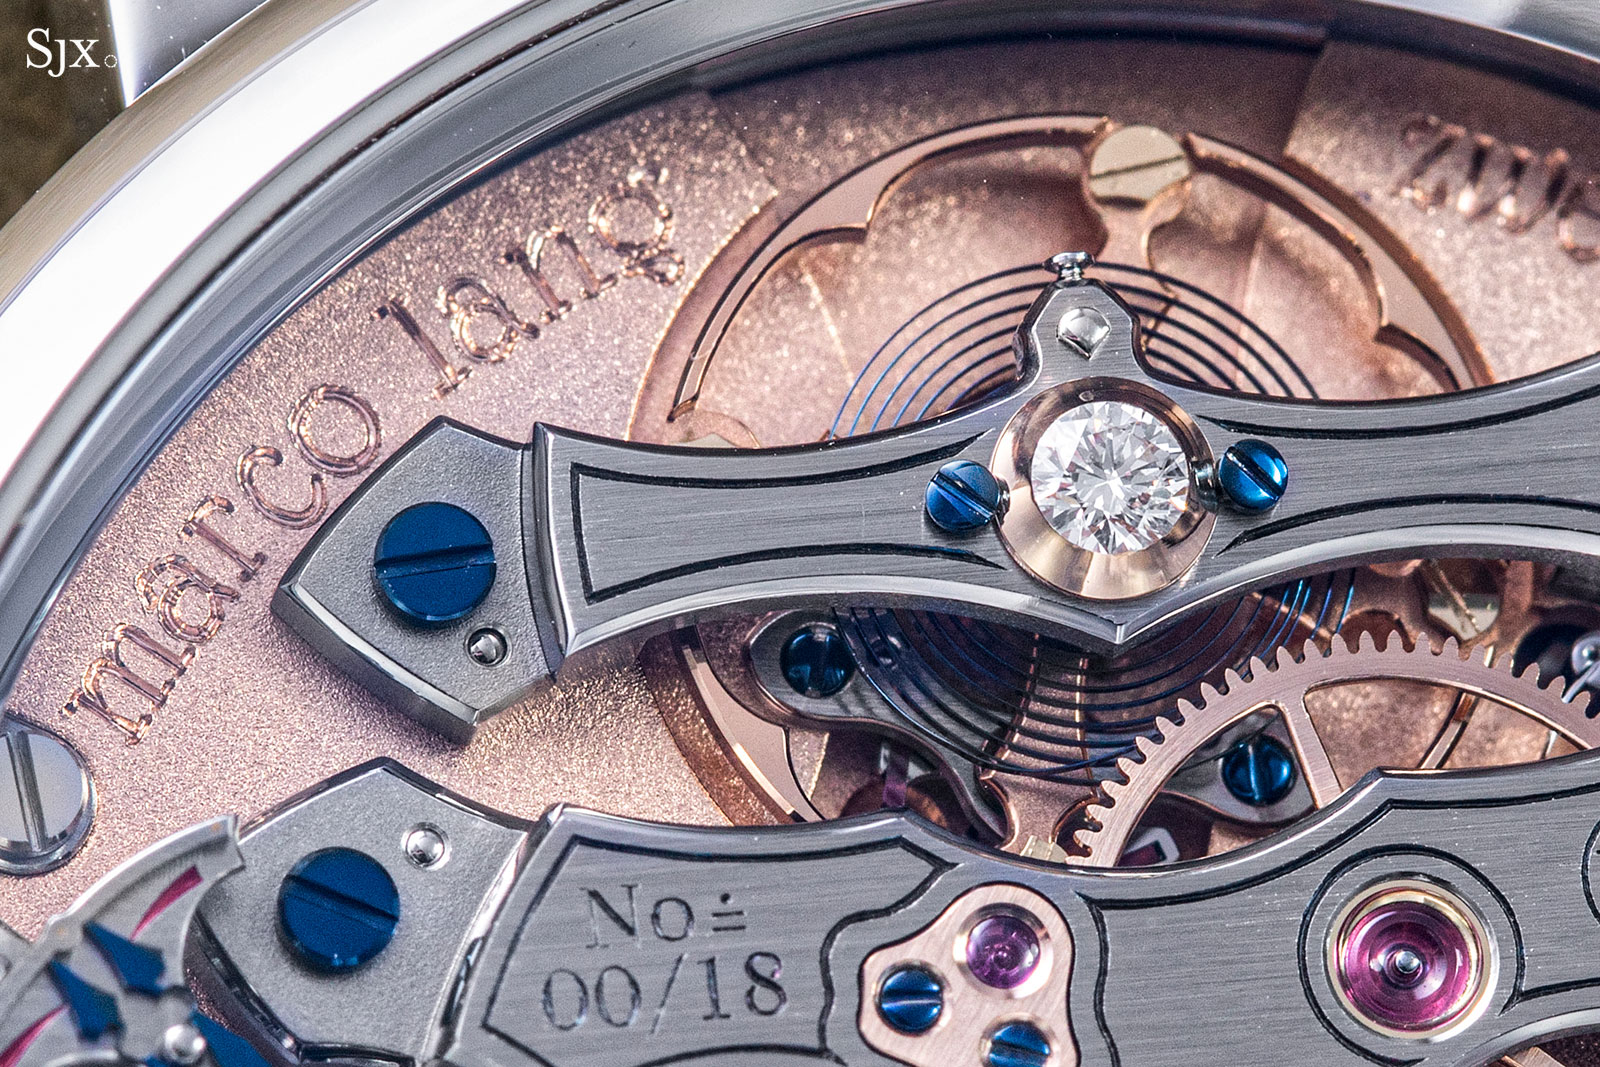 The decorative diamond endstone on the pivot jewel for the balance, a detail that was inspired by 19th century pocket watches 